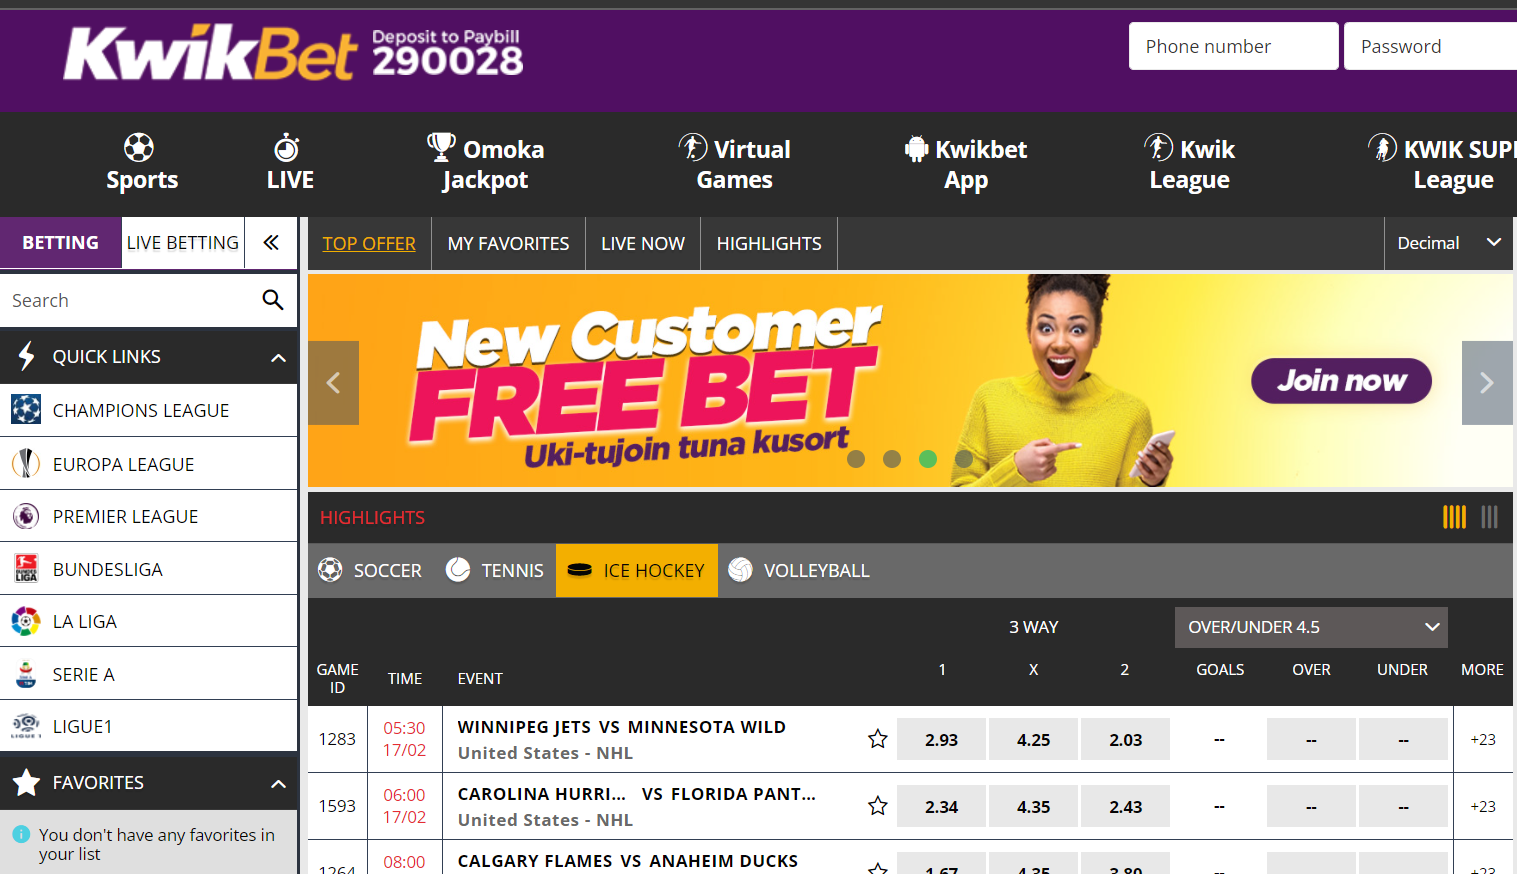 Kwikbet offers bettors to bet with a variety of options and details of ice hockey as well.